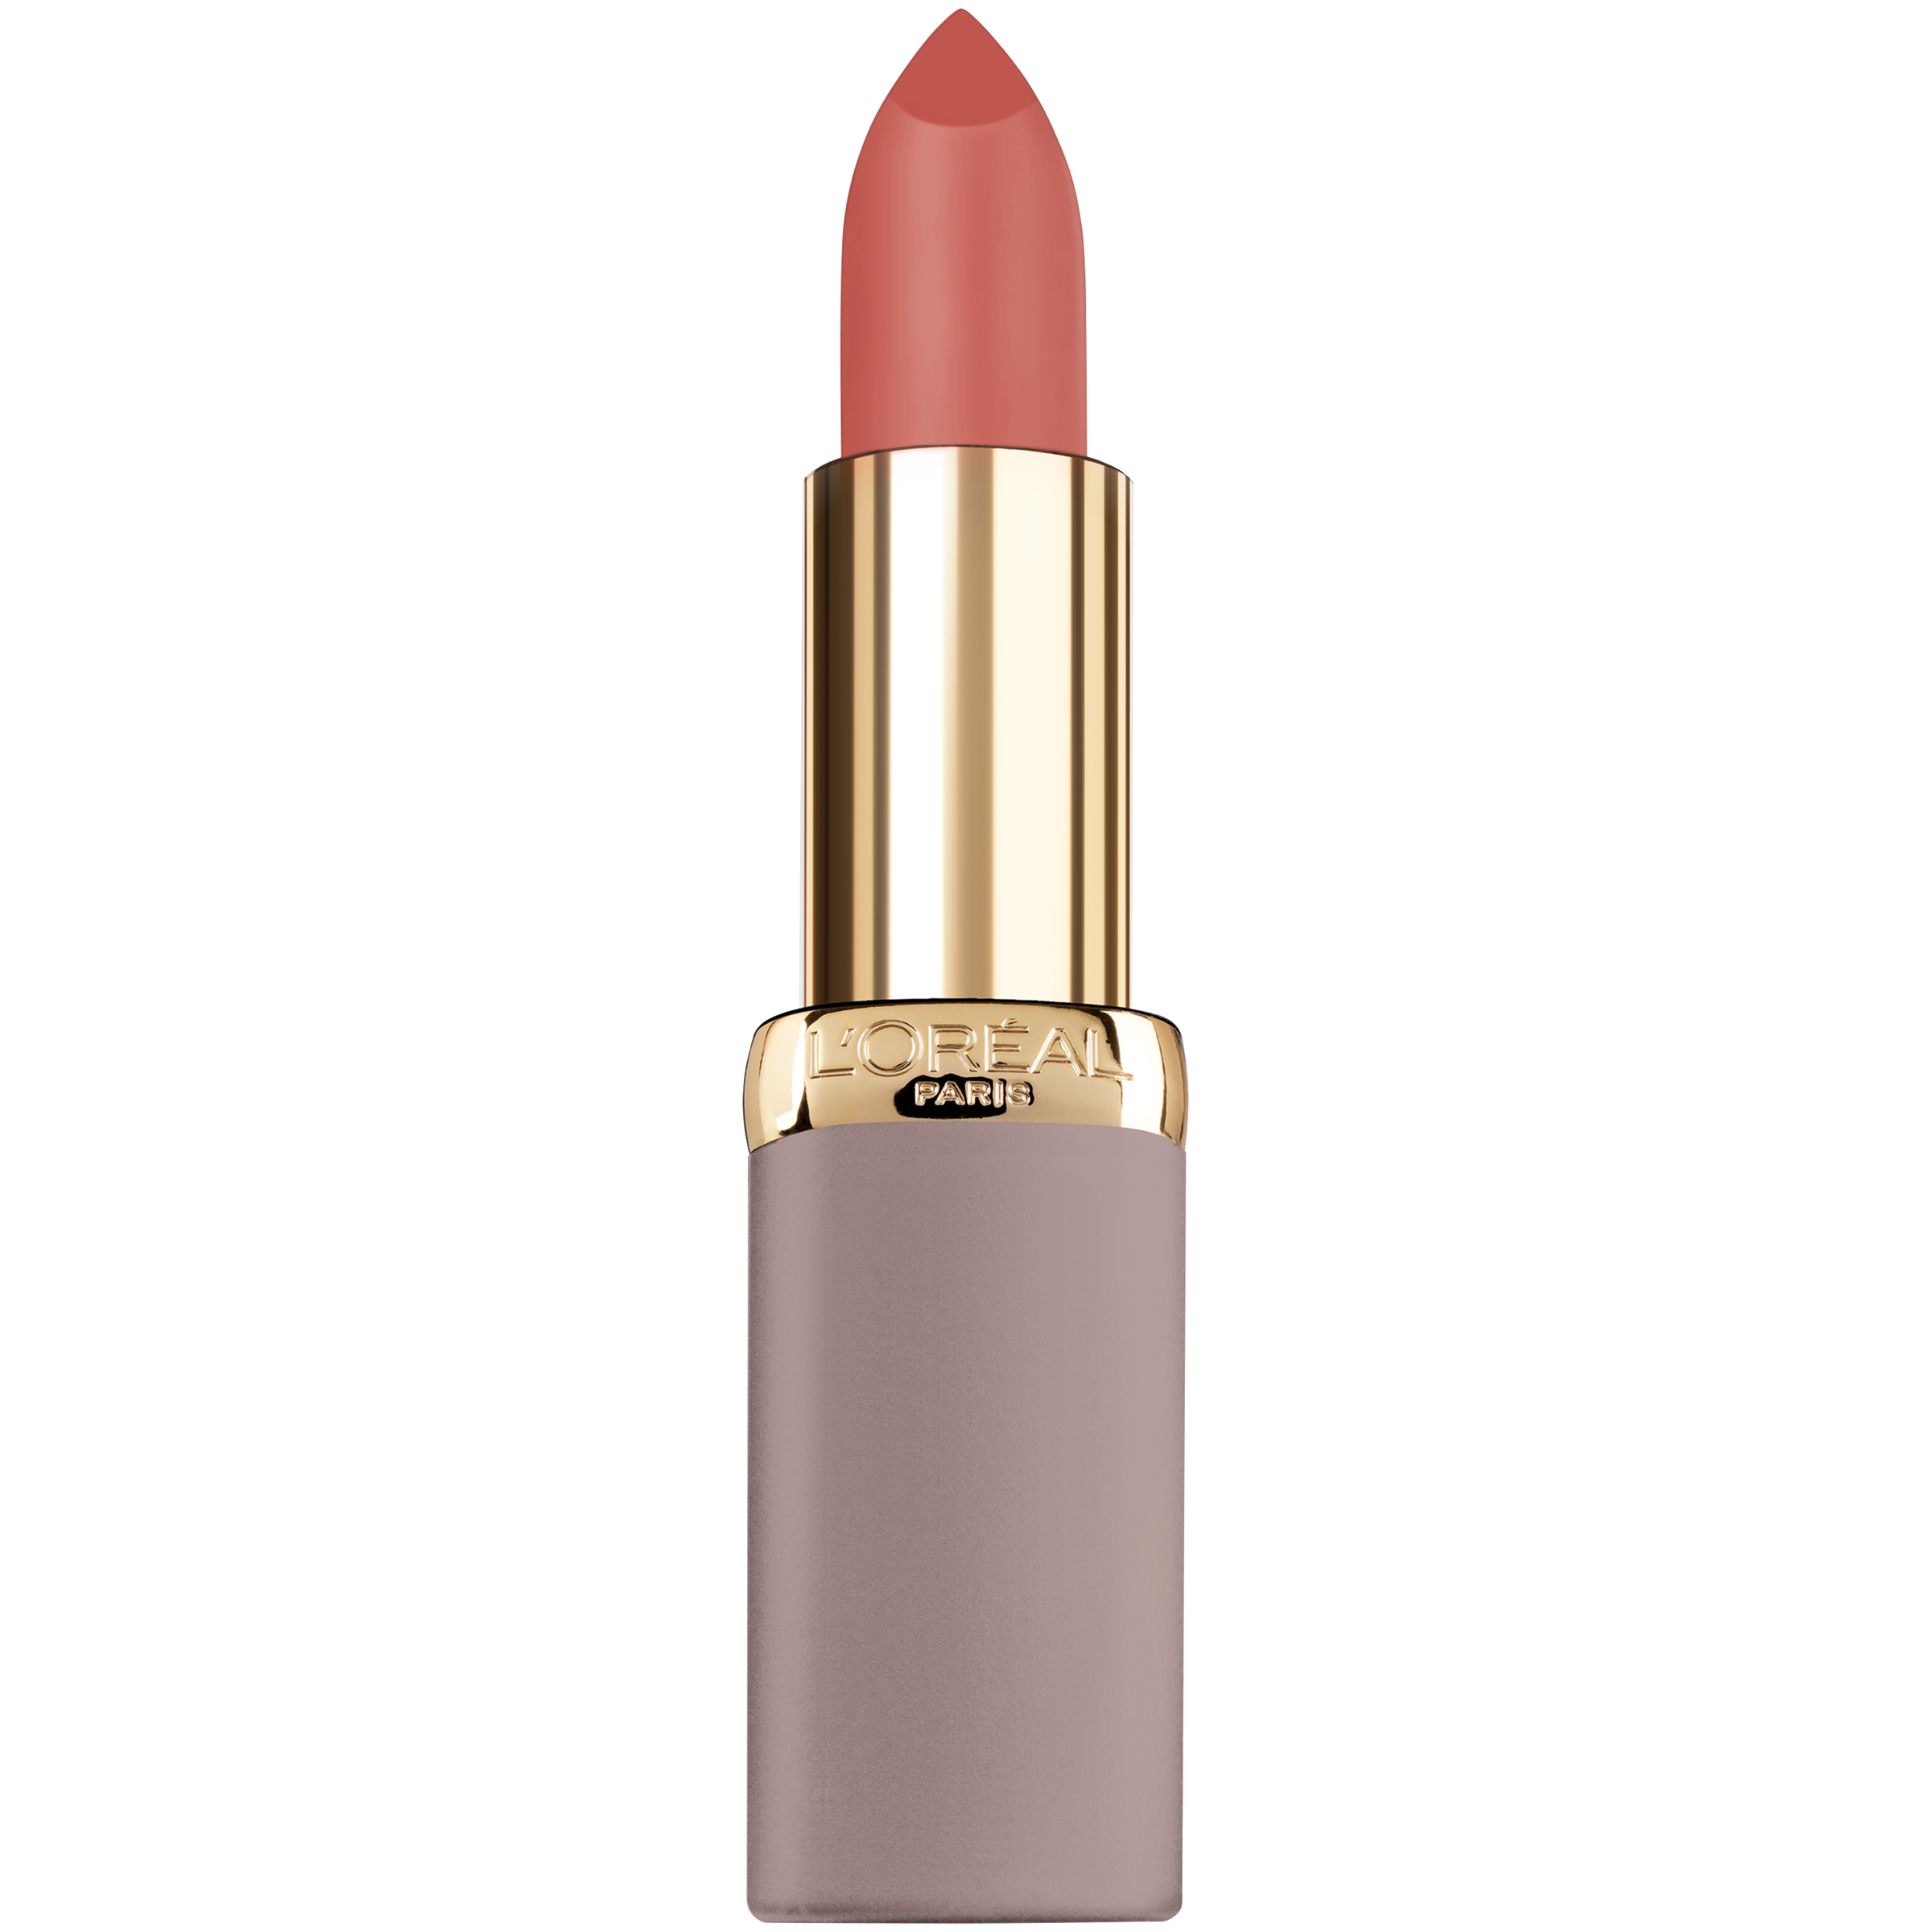 L'Oreal Paris Colour Riche Ultra Matte Highly Pigmented Nude Lipstick, Risque Roses, 0.13 oz. - image 1 of 5